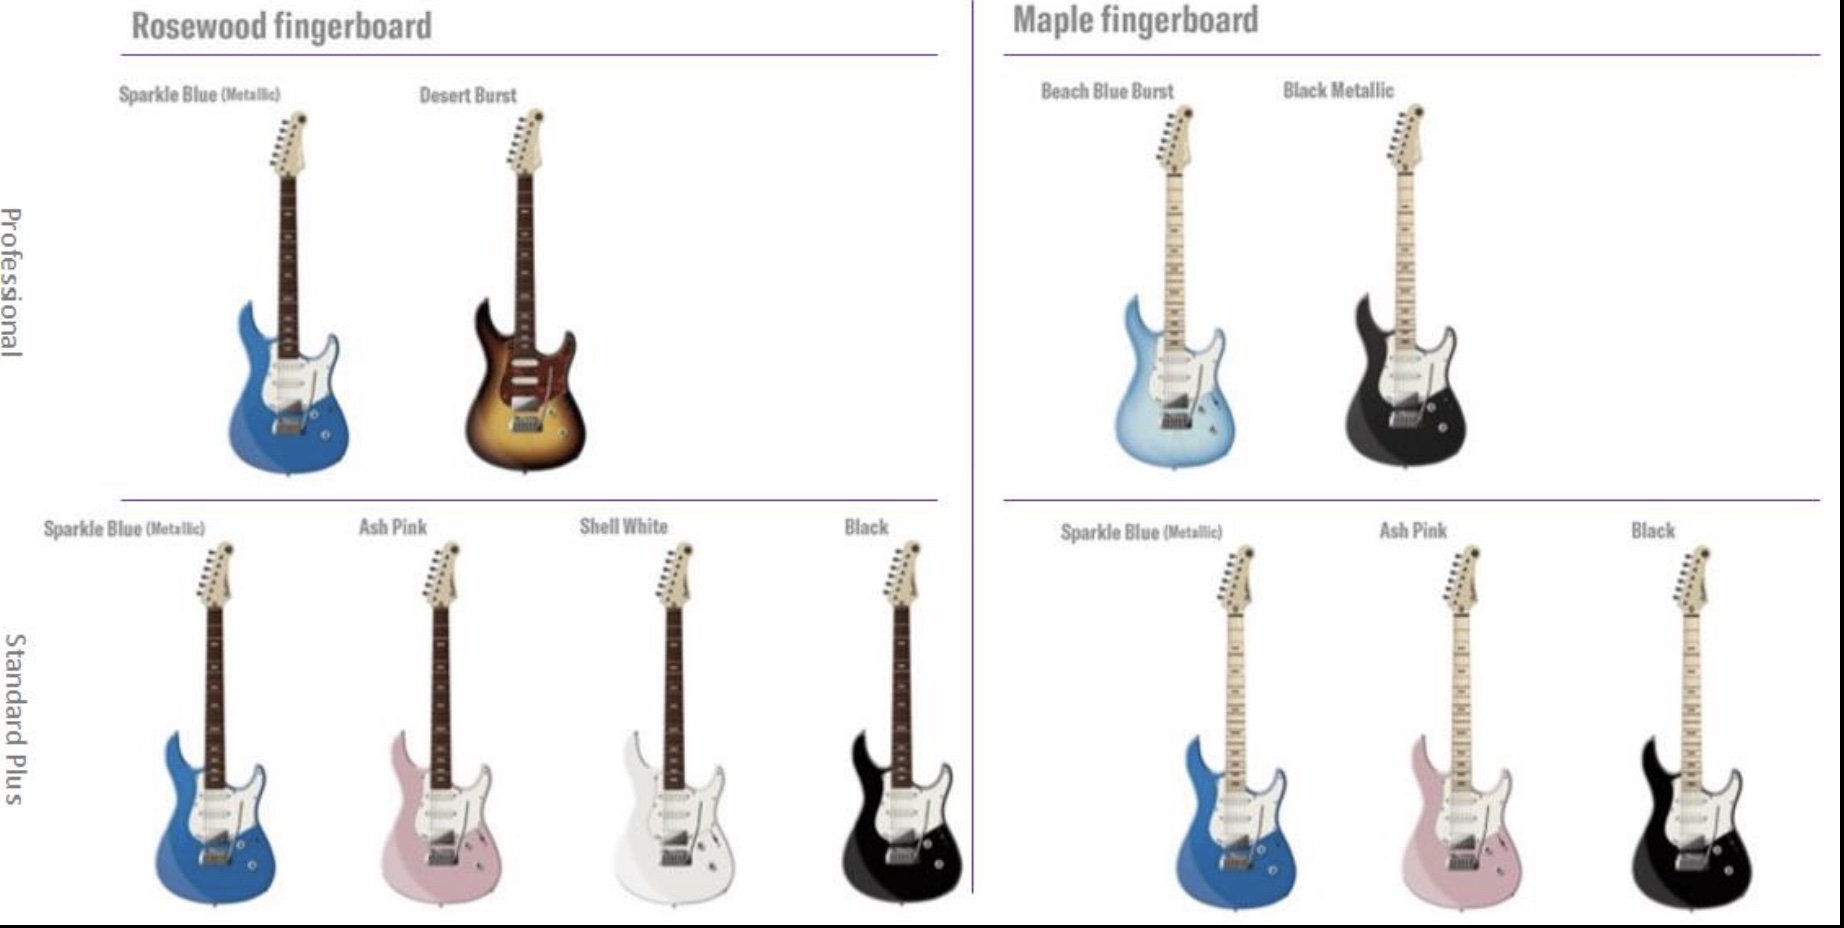 Diagram of a variety of guitars in the line.